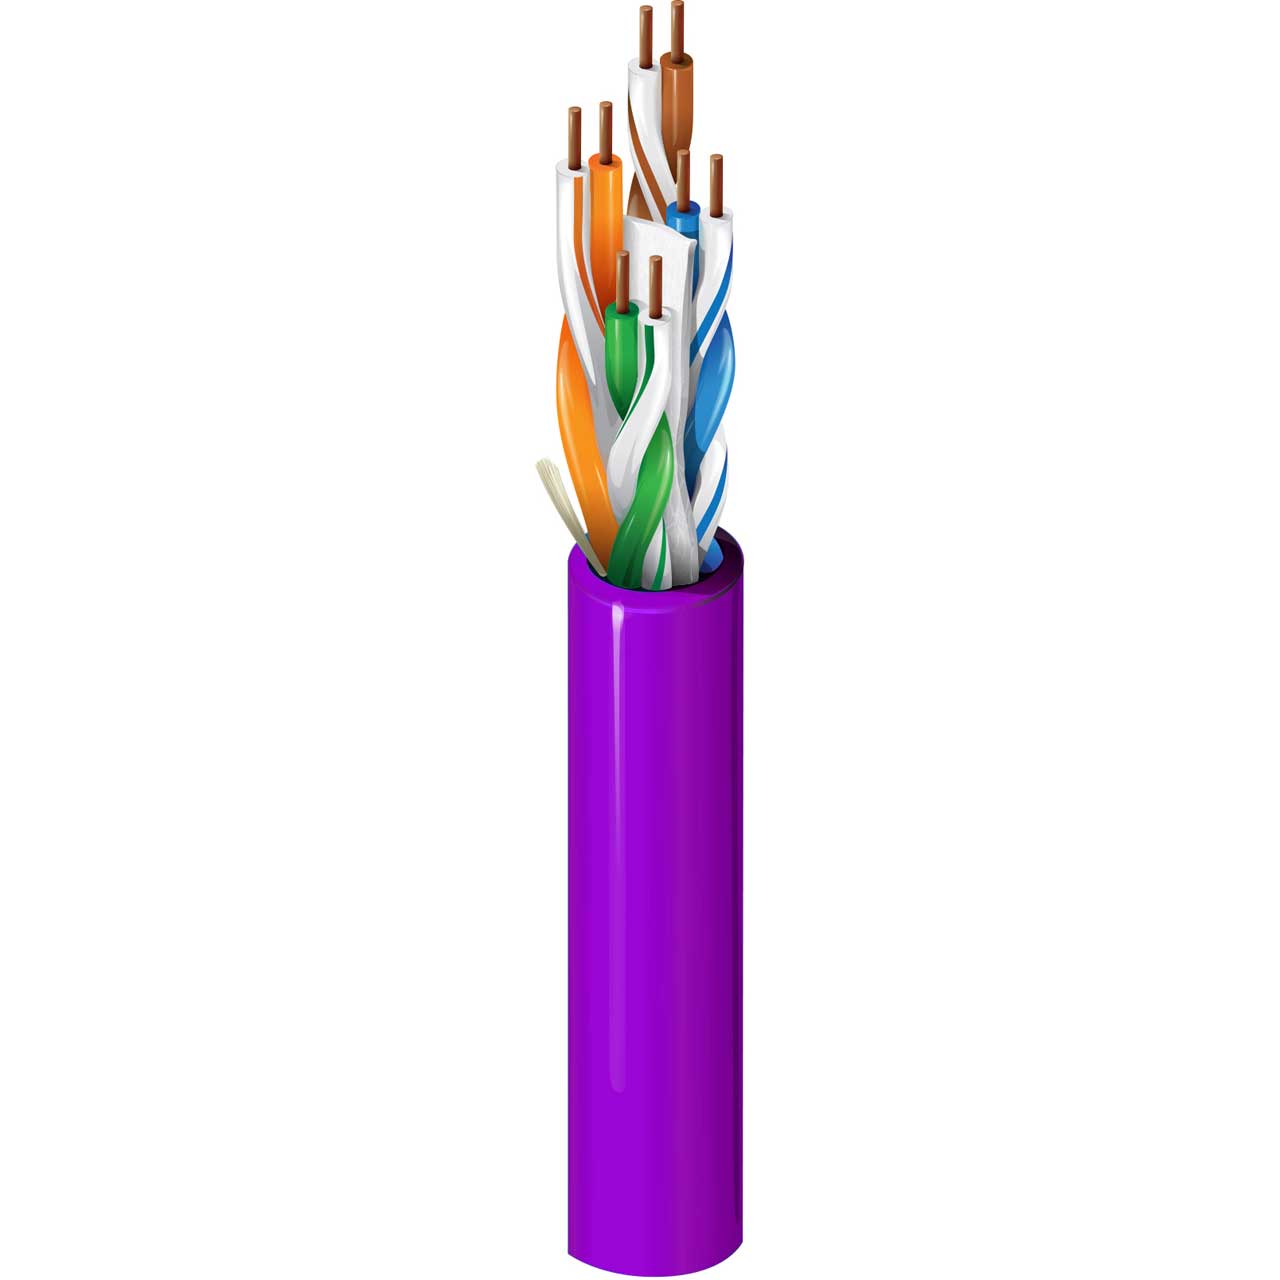 Belden 2412 23 AWG Enhanced Category 6 350MHz Nonbonded-Pair Cable 1000 Foot - Violet  2412 007A1000